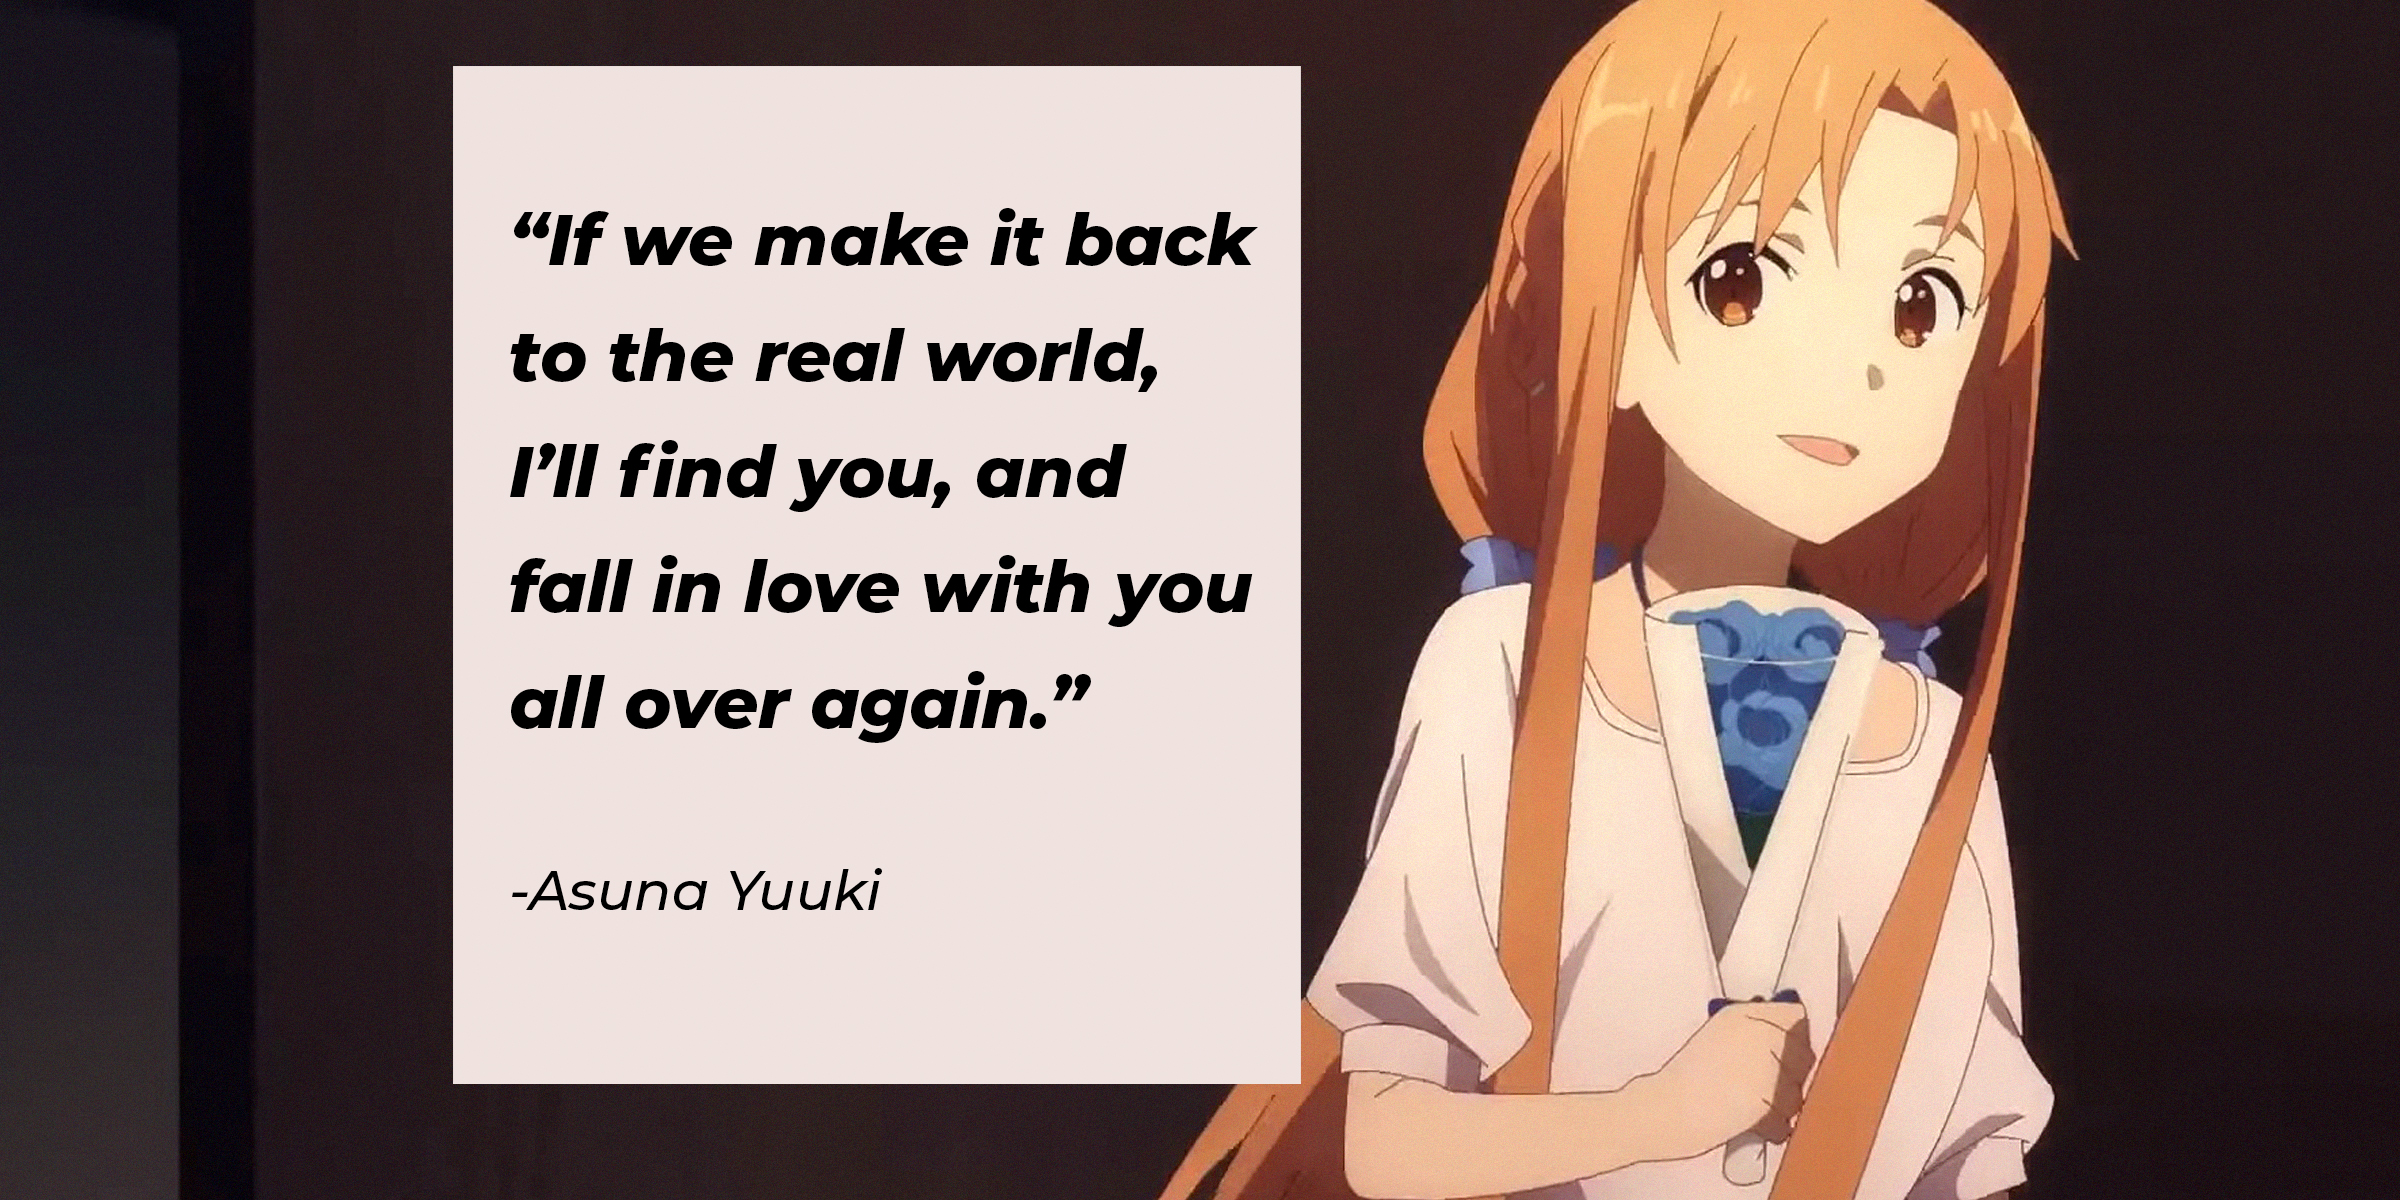 A picture of Asuna Yuuki with her quote: “If we make it back to the real world, I’ll find you, and fall in love with you all over again.” | Source: facebook.com/SwordArtOnlineUSA